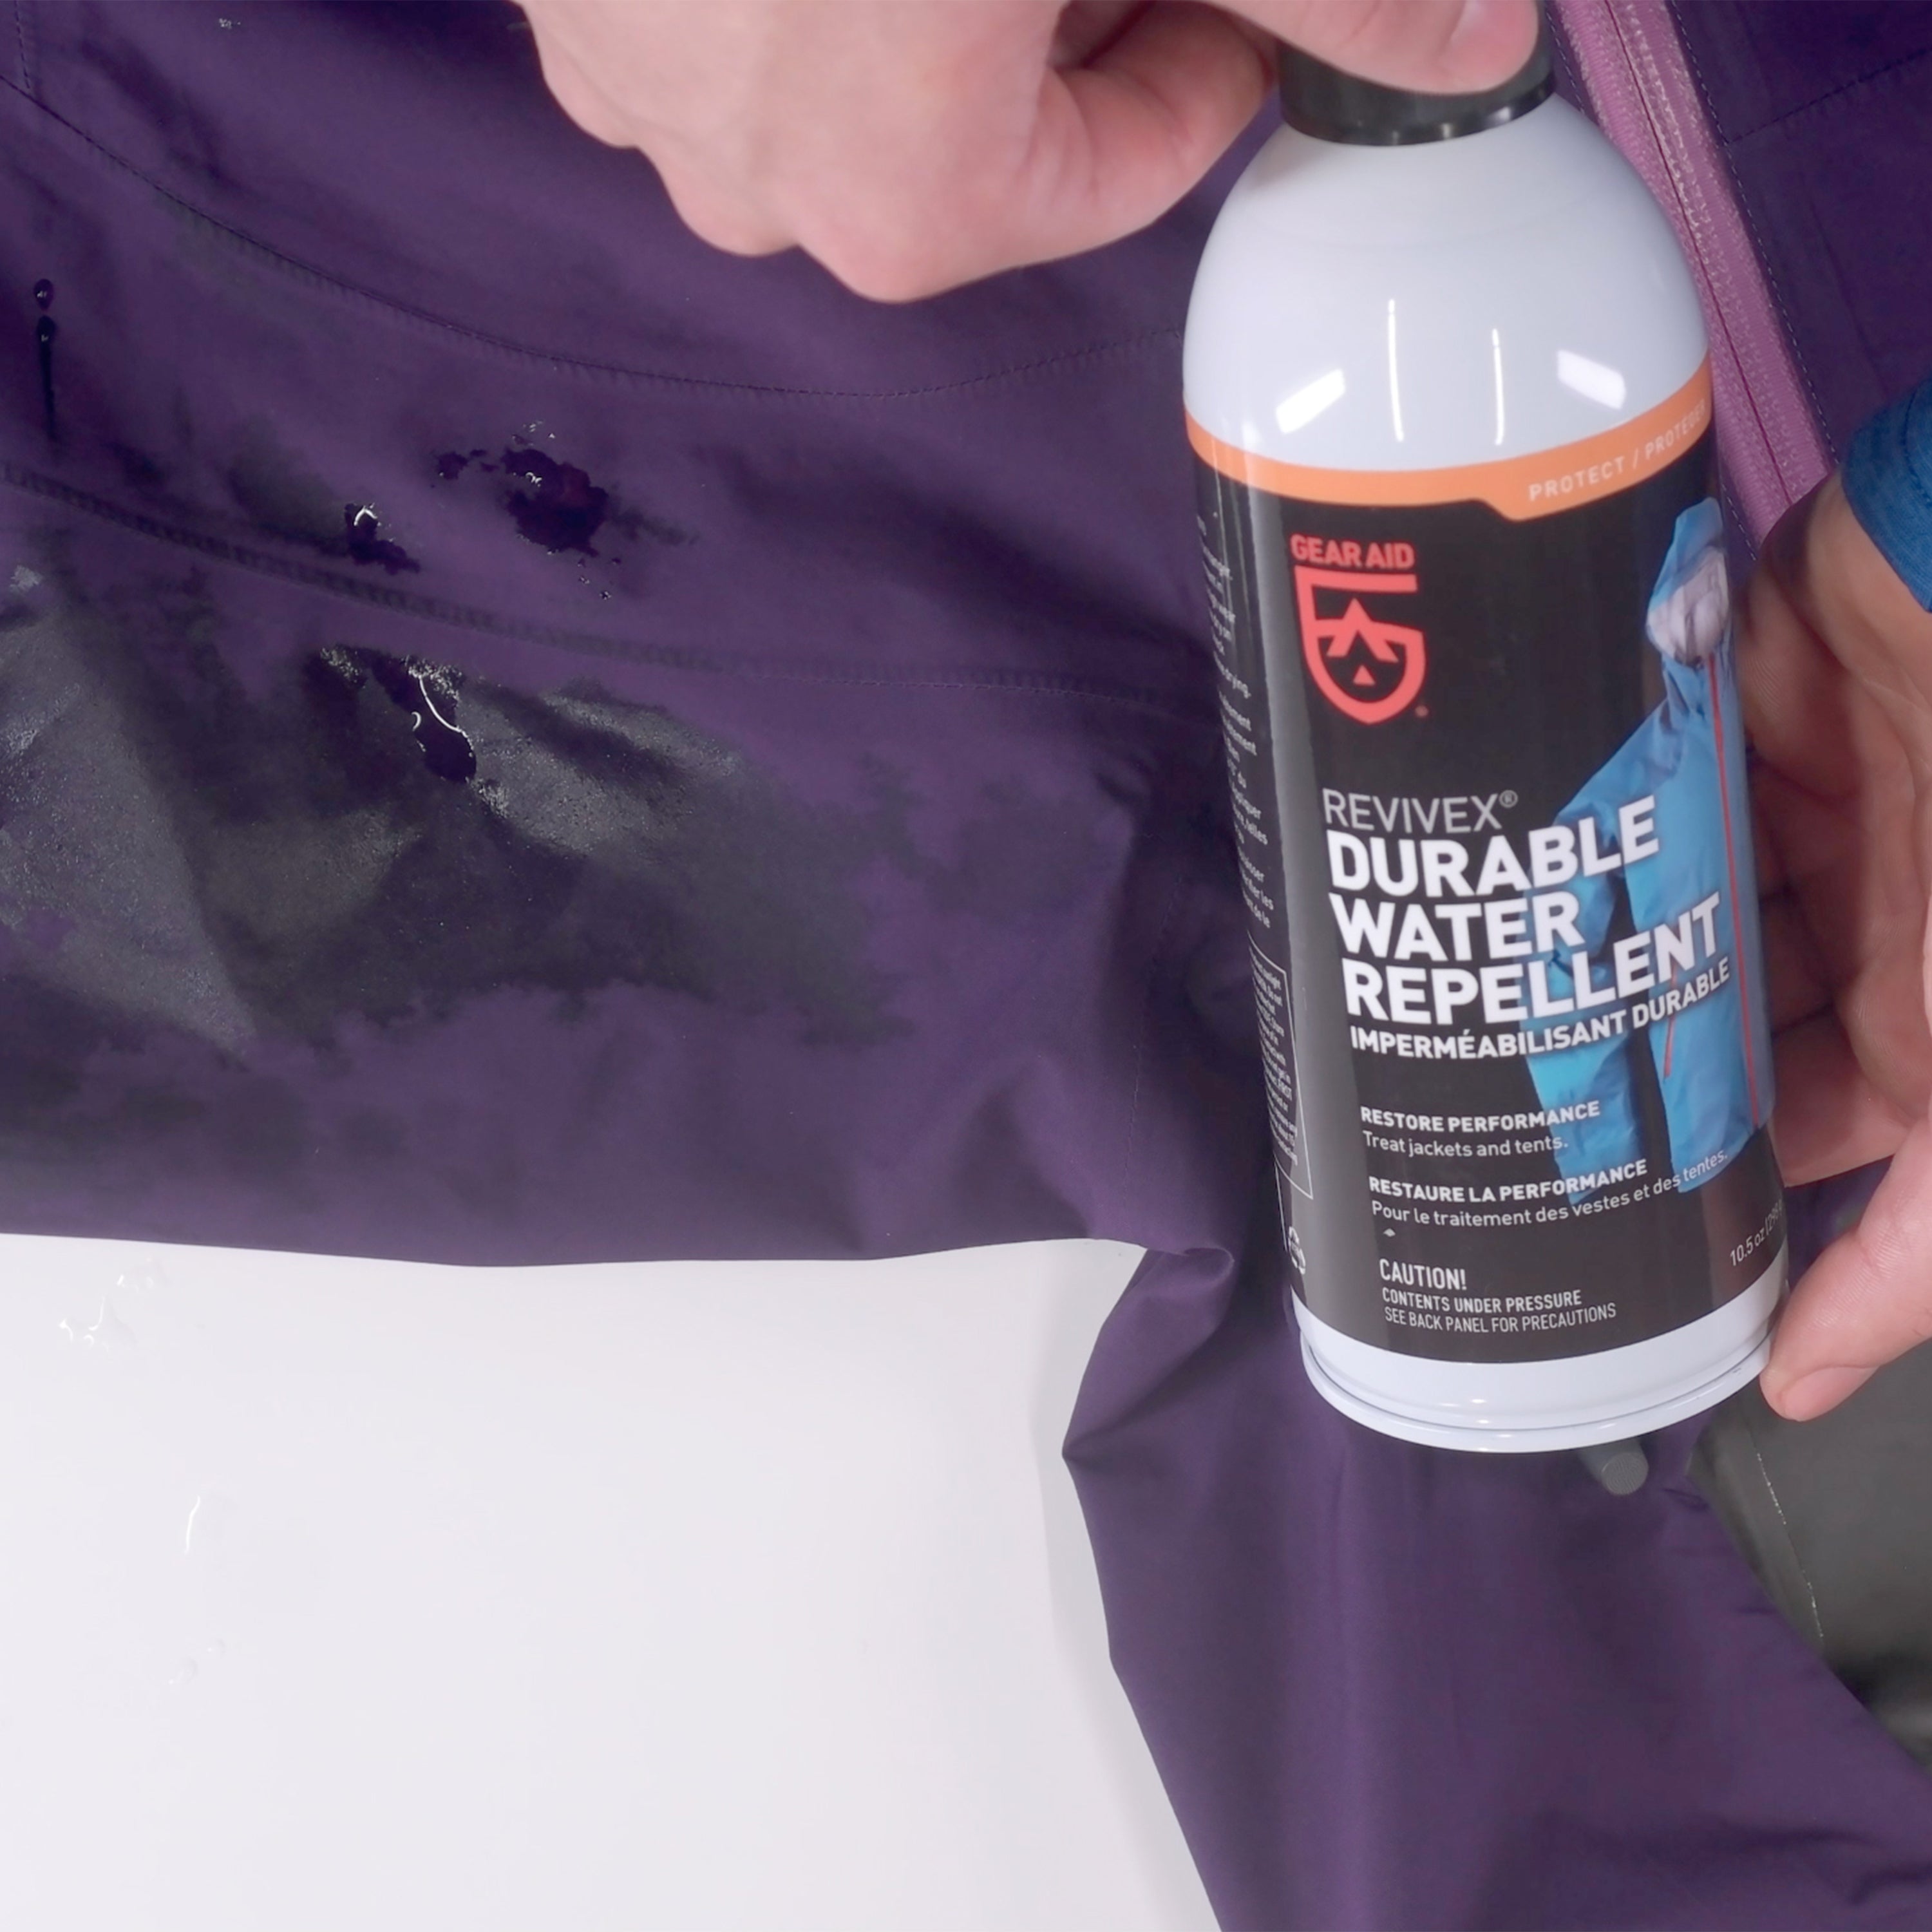 Durable Water Repellent (DWR) Care